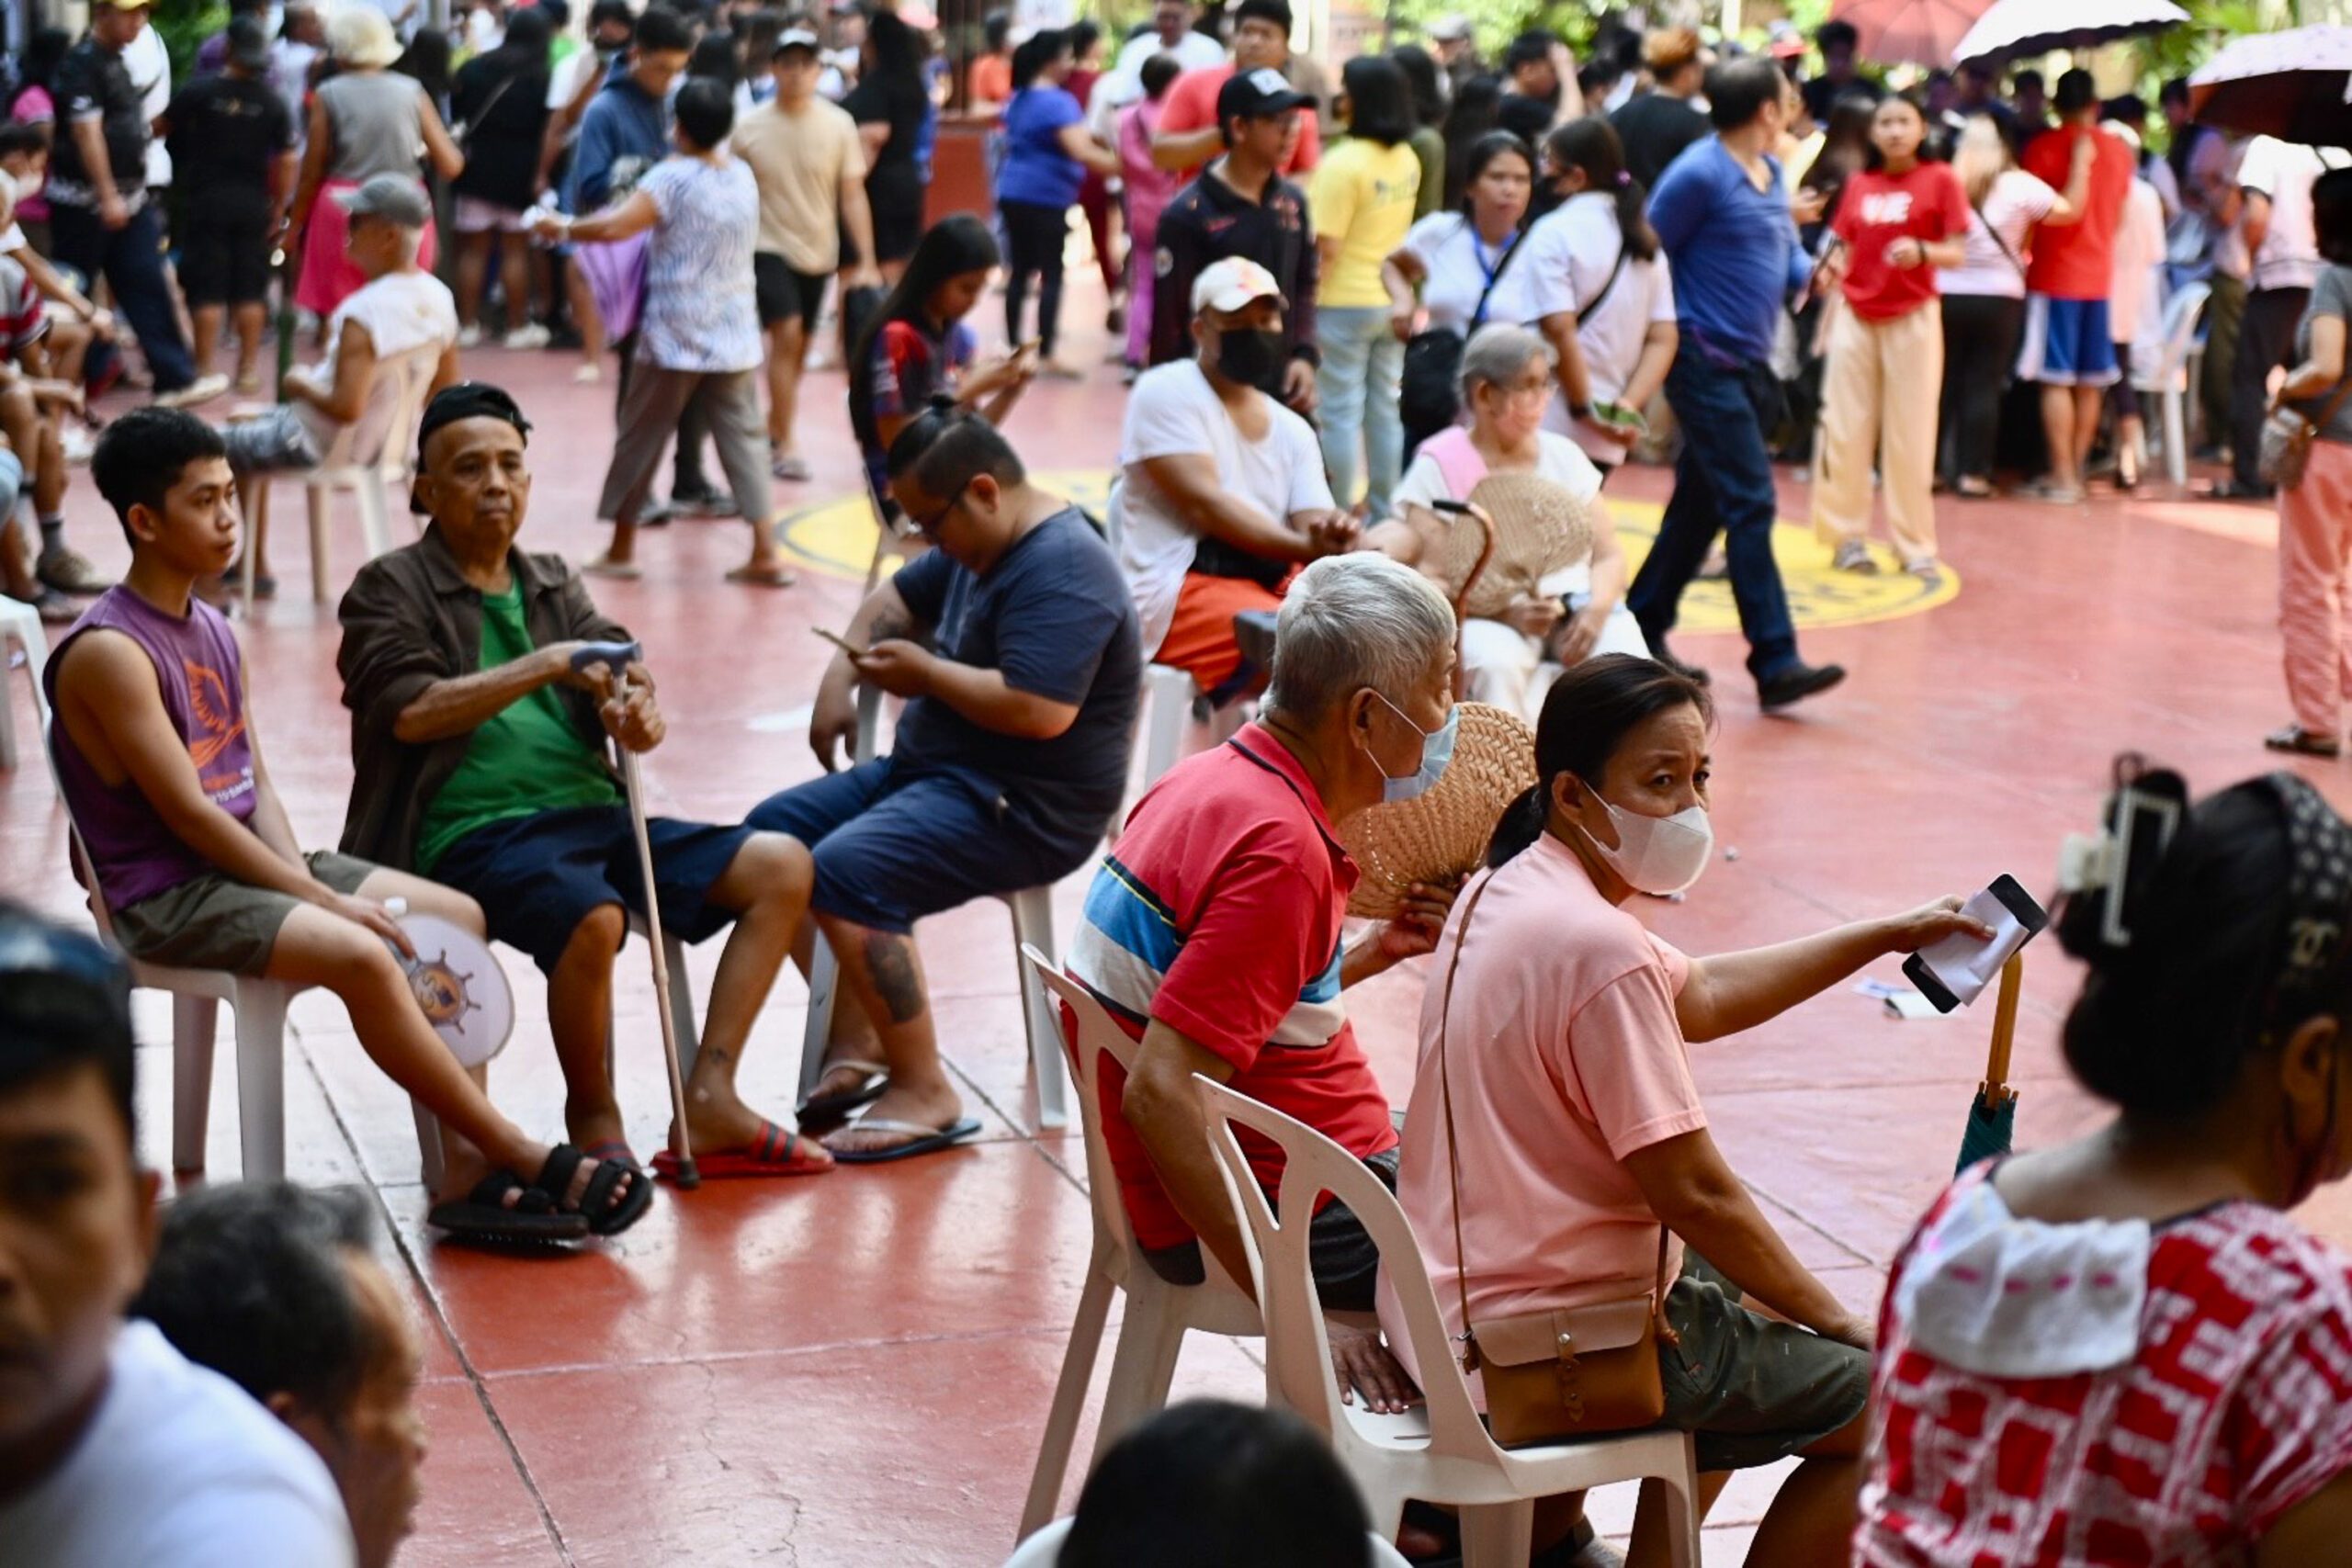 Senior citizens, PWDs faced struggles in voting during barangay, SK elections